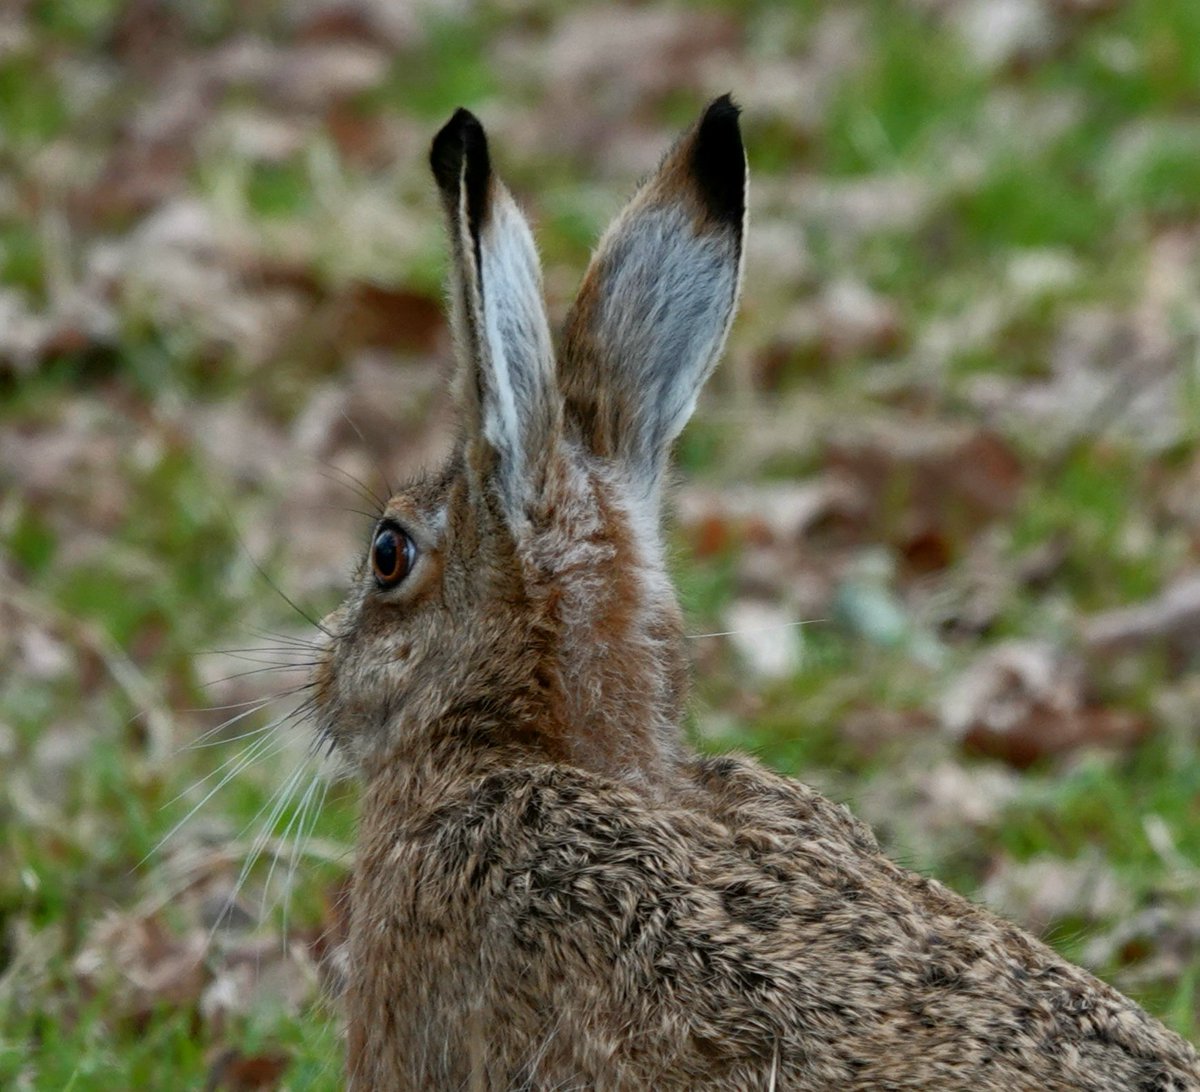 This ever alert brown hare, one of the many @AlthorpHouse is able to see me perfectly well although its facing forward! It's only a very small spot in front and a line directly behind its head where there's no vision, keen hearing helps to cover that. Conservation@althorp.com